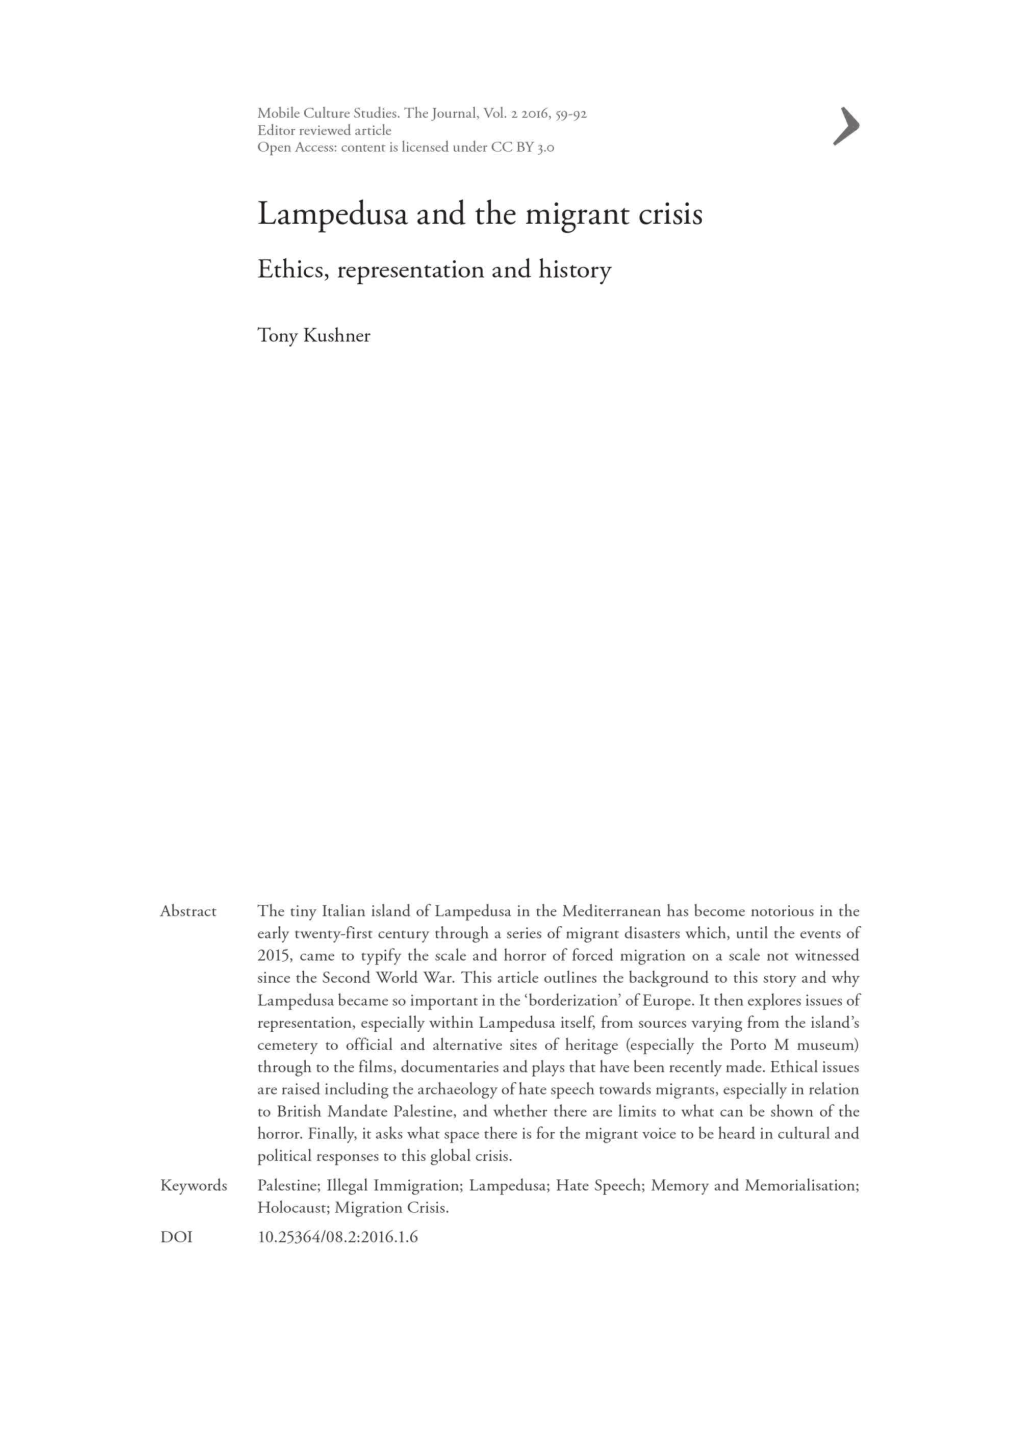 Lampedusa and the Migrant Crisis Ethics, Representation and History